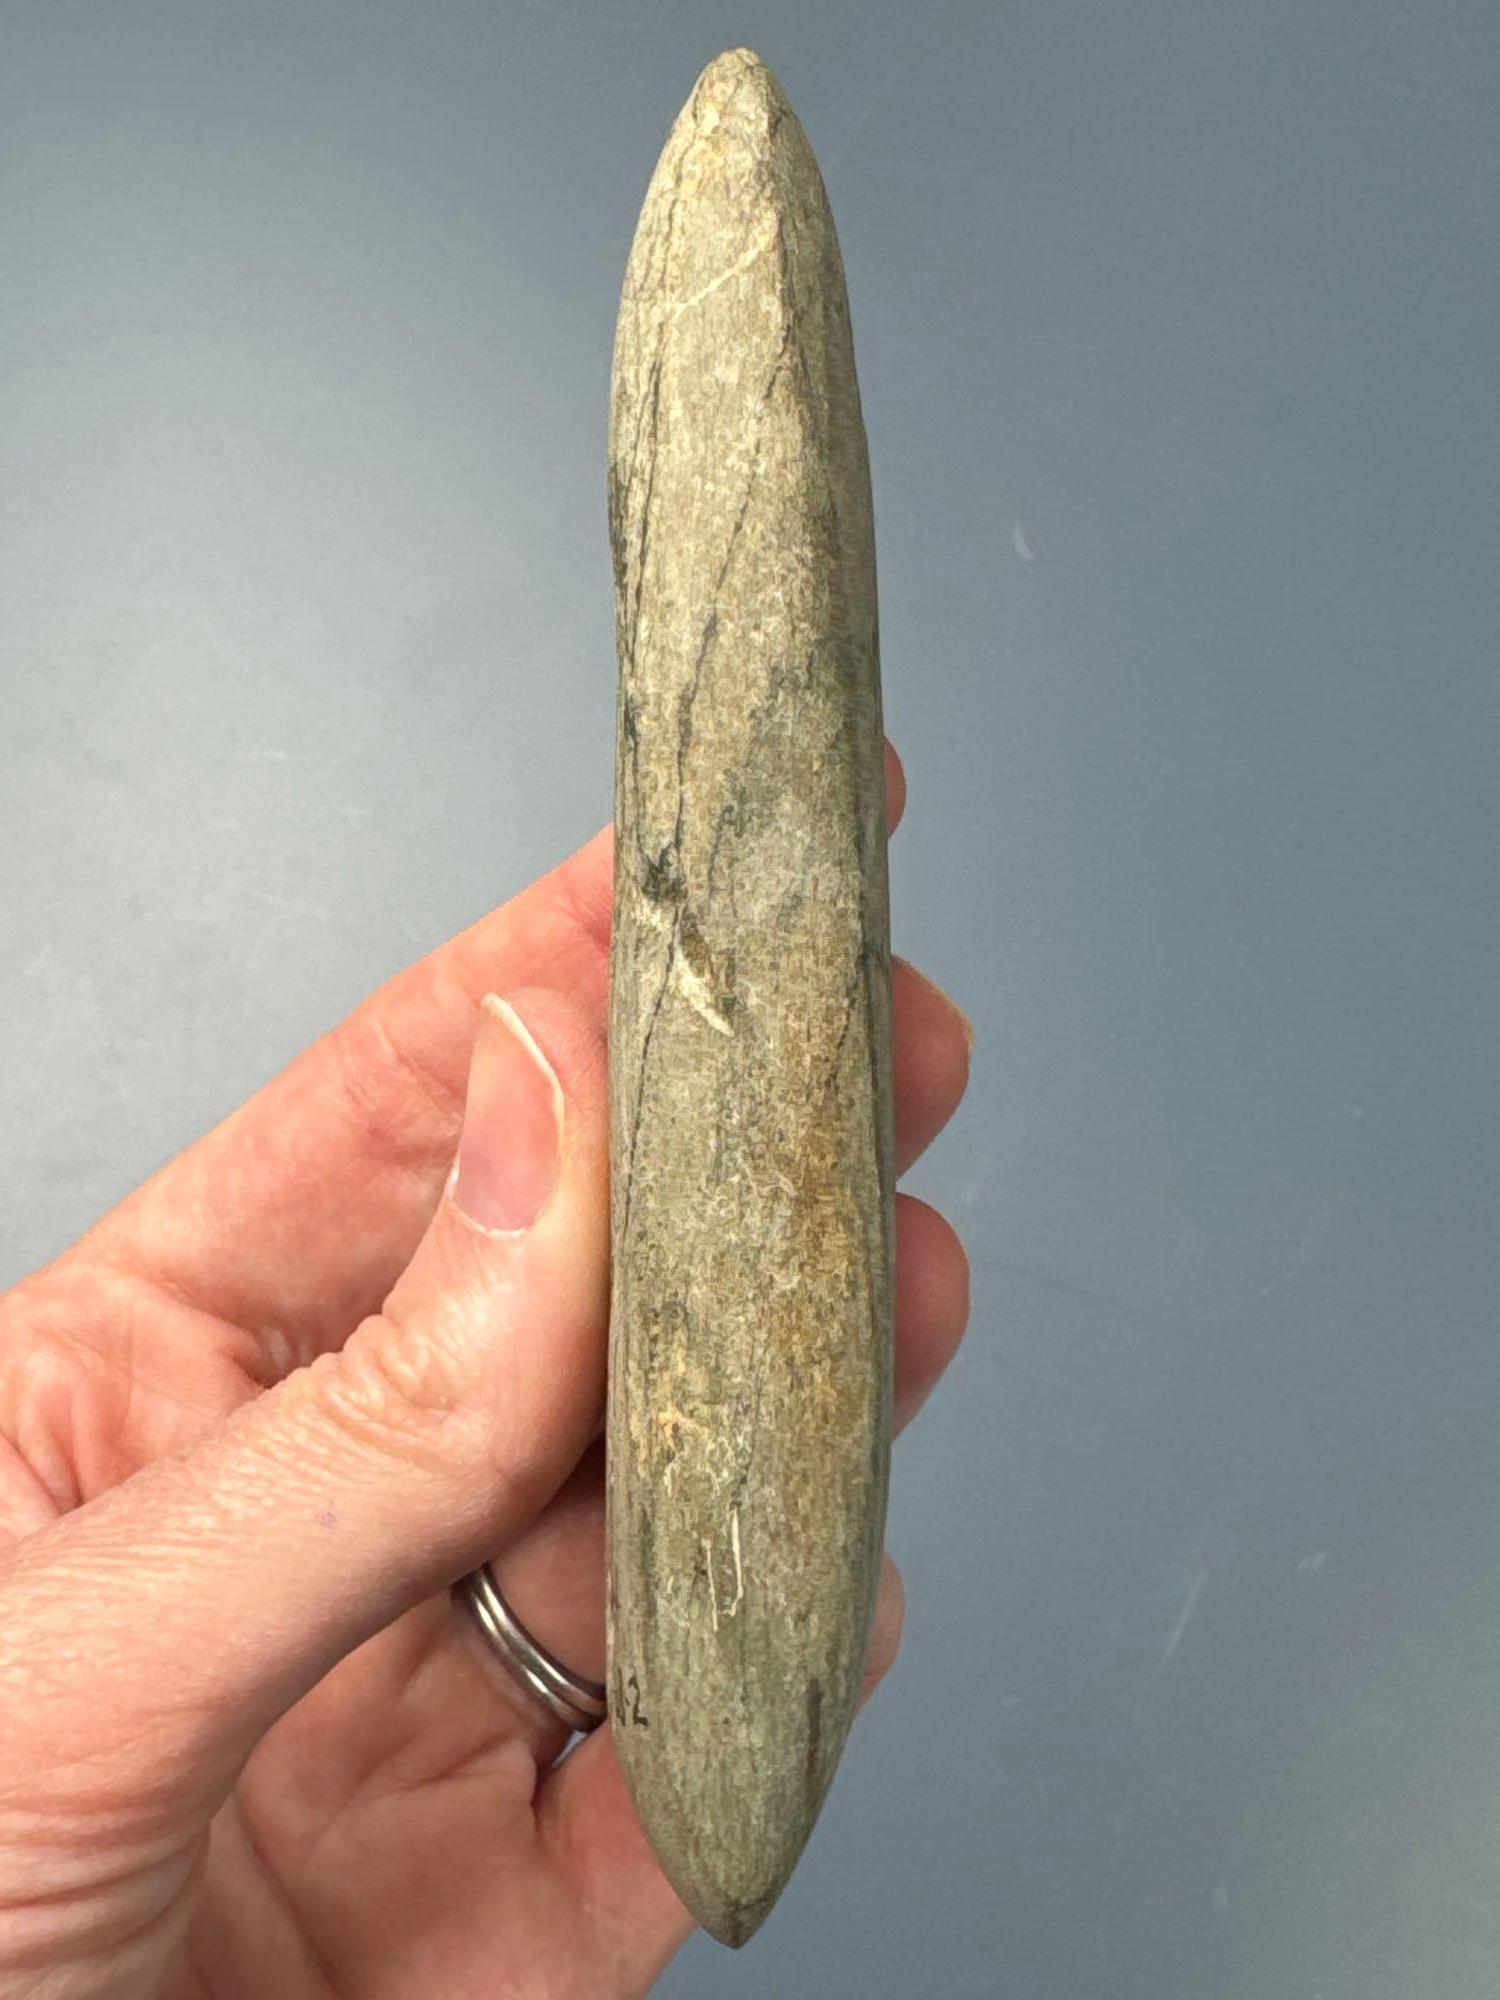 NICE Banded Stone Celt, Found in Phelps, NY, Purchased from Dick Savidge in 1998, Ex: Walt Podpora C